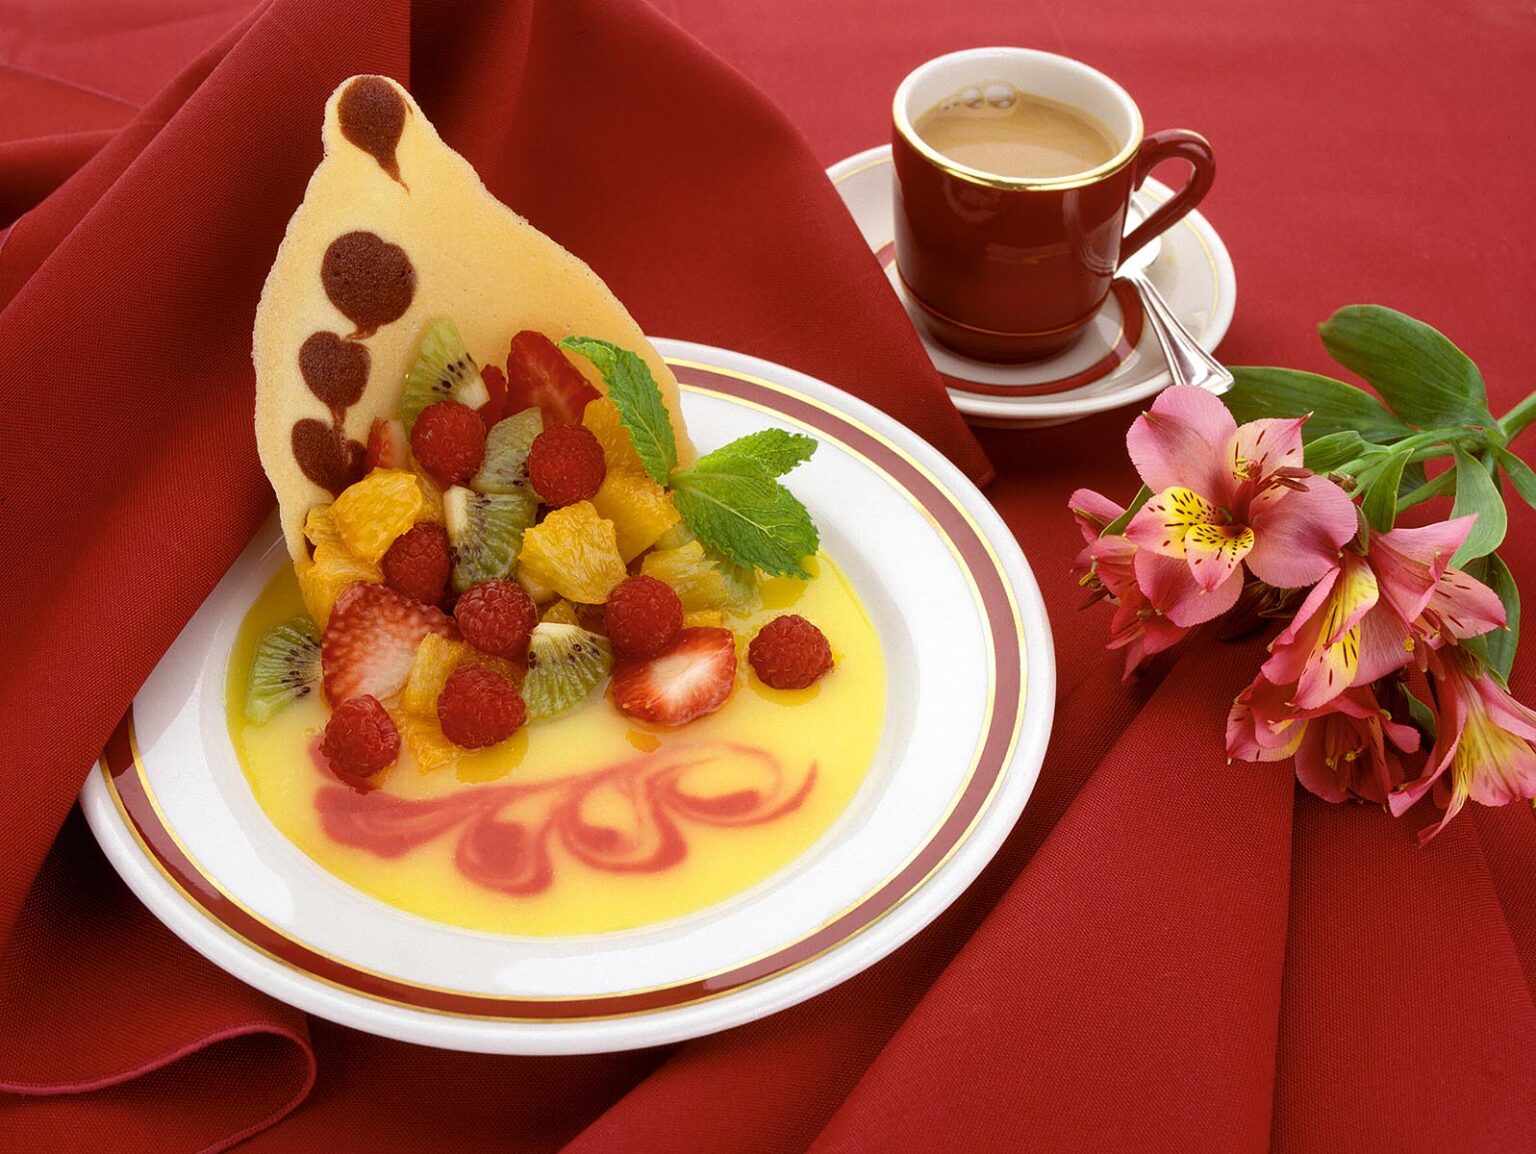 FRUIT DESSERT displayed with COFFEE and flowers